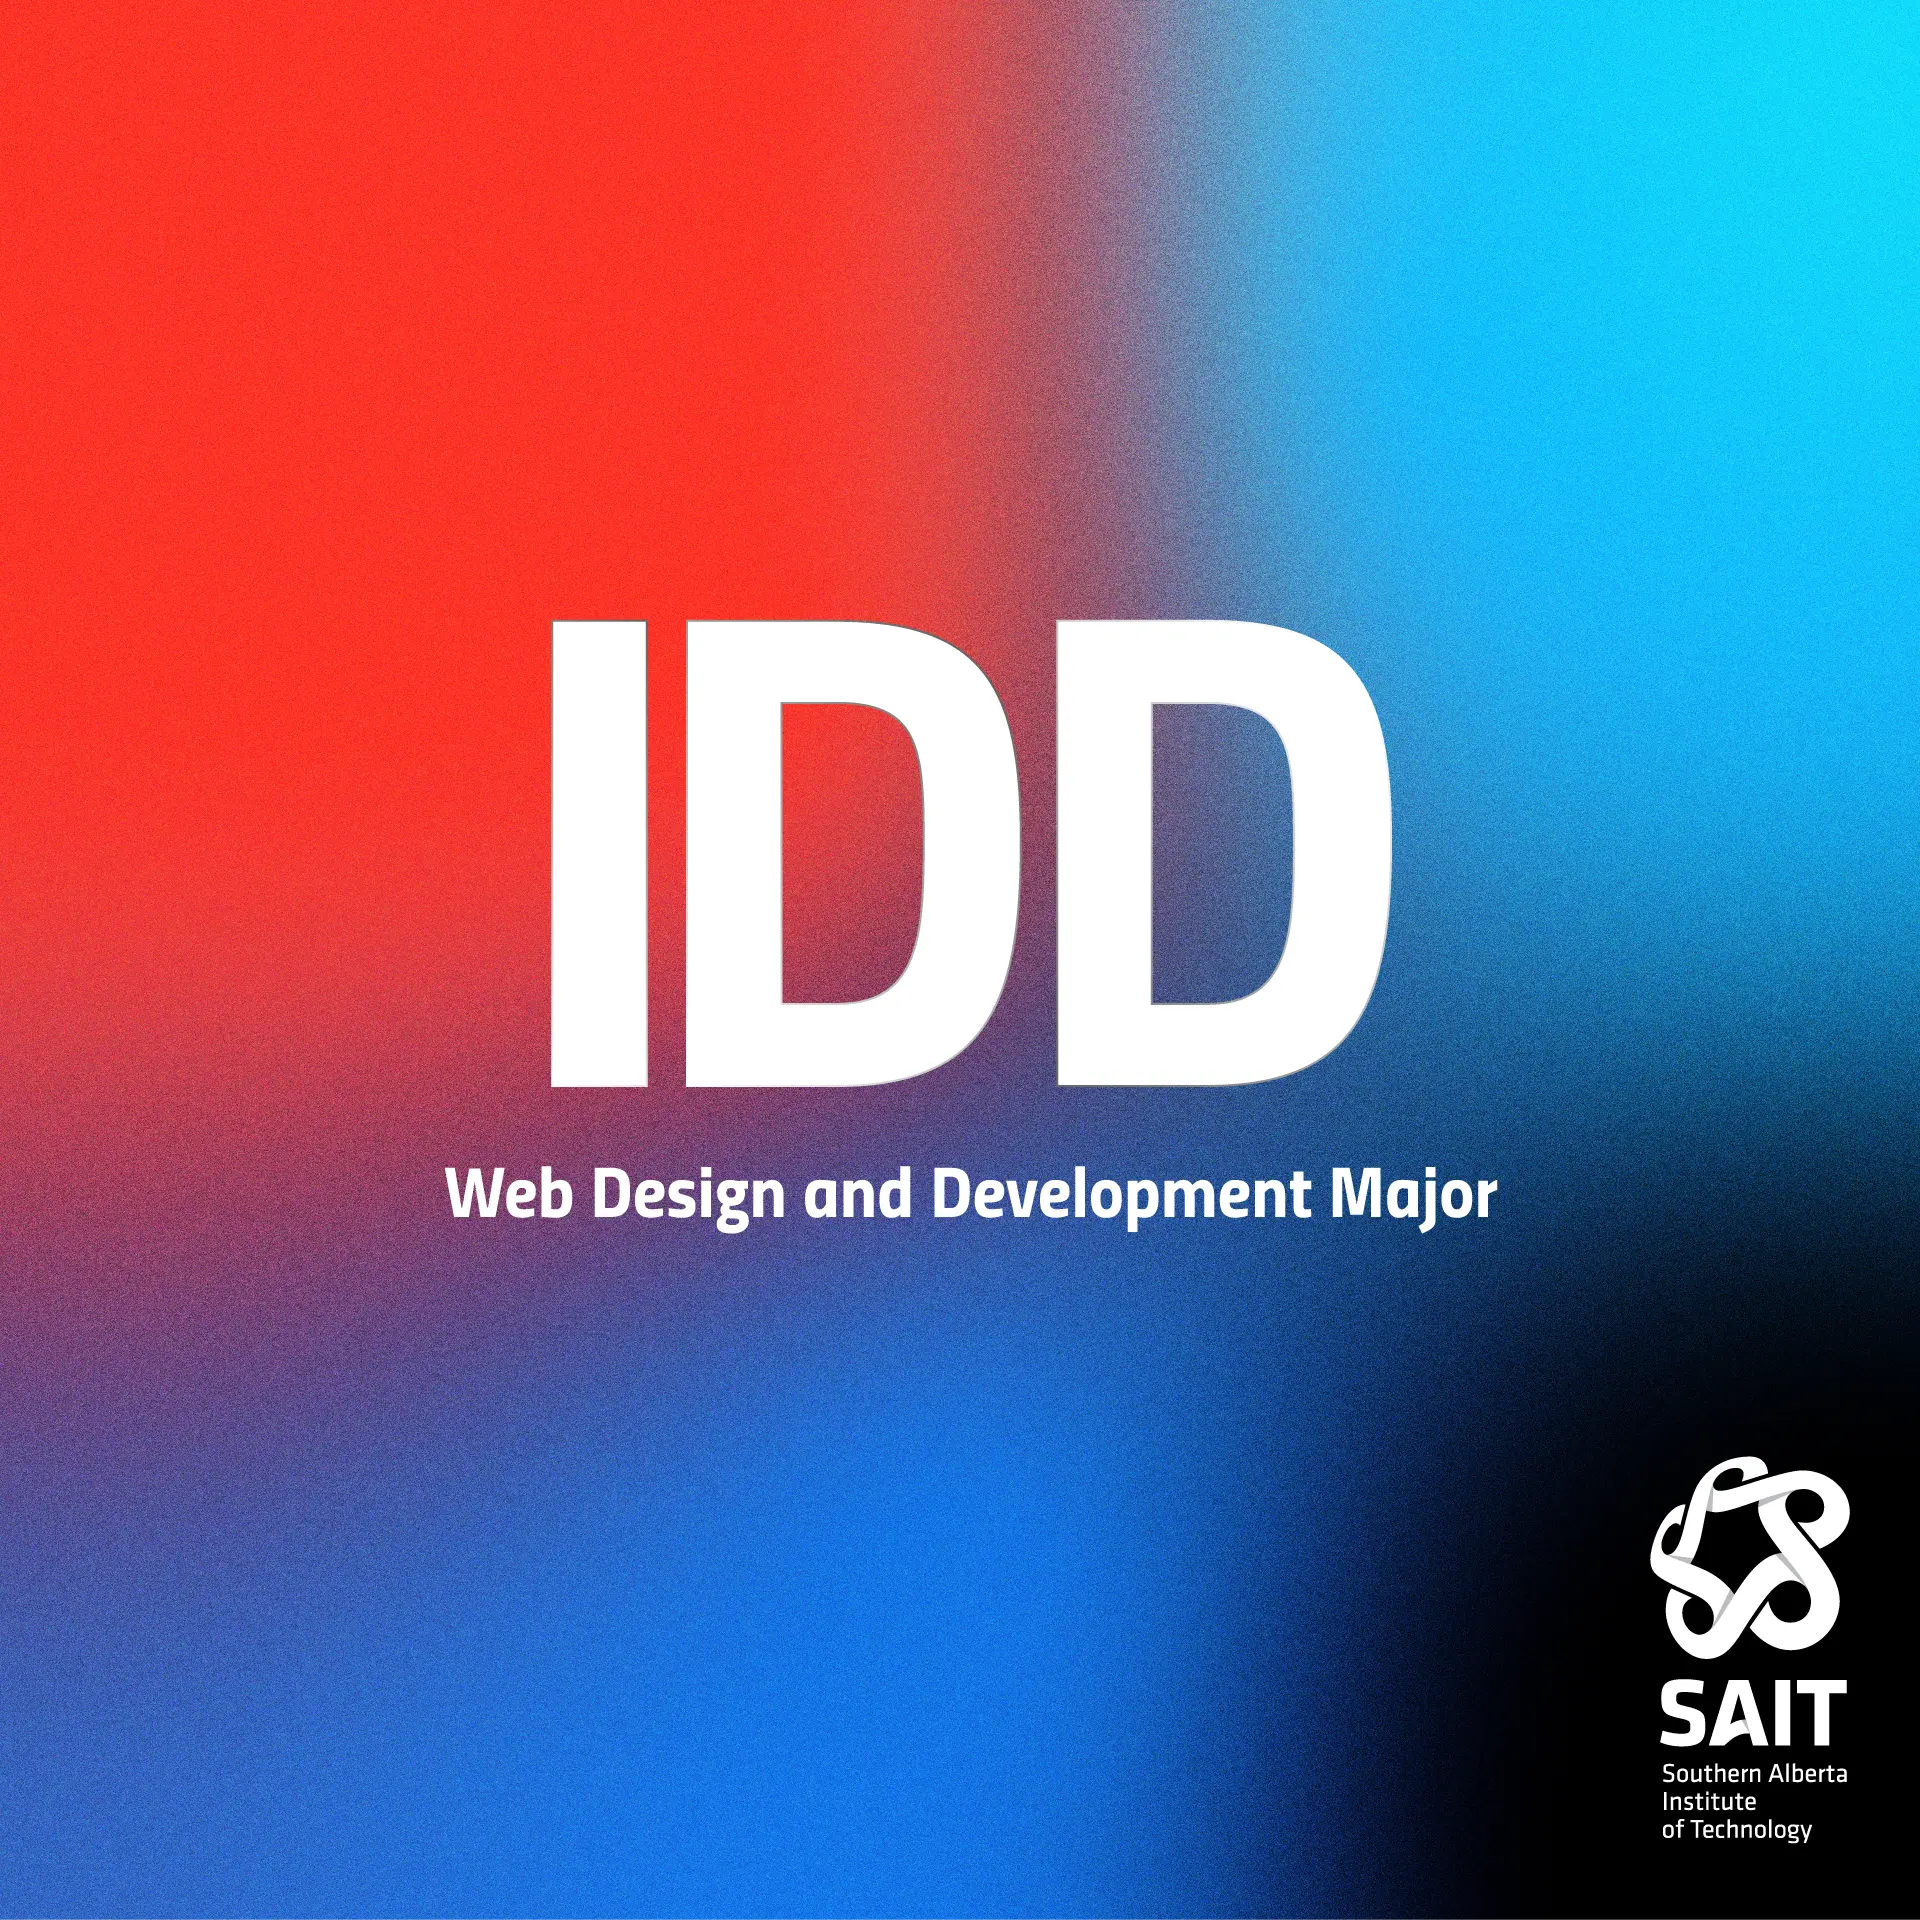 Centered logo that says IDD - Web Design and Development with a SAIT logo in the bottom right. Background is red, blue, blue gradient noise effects.